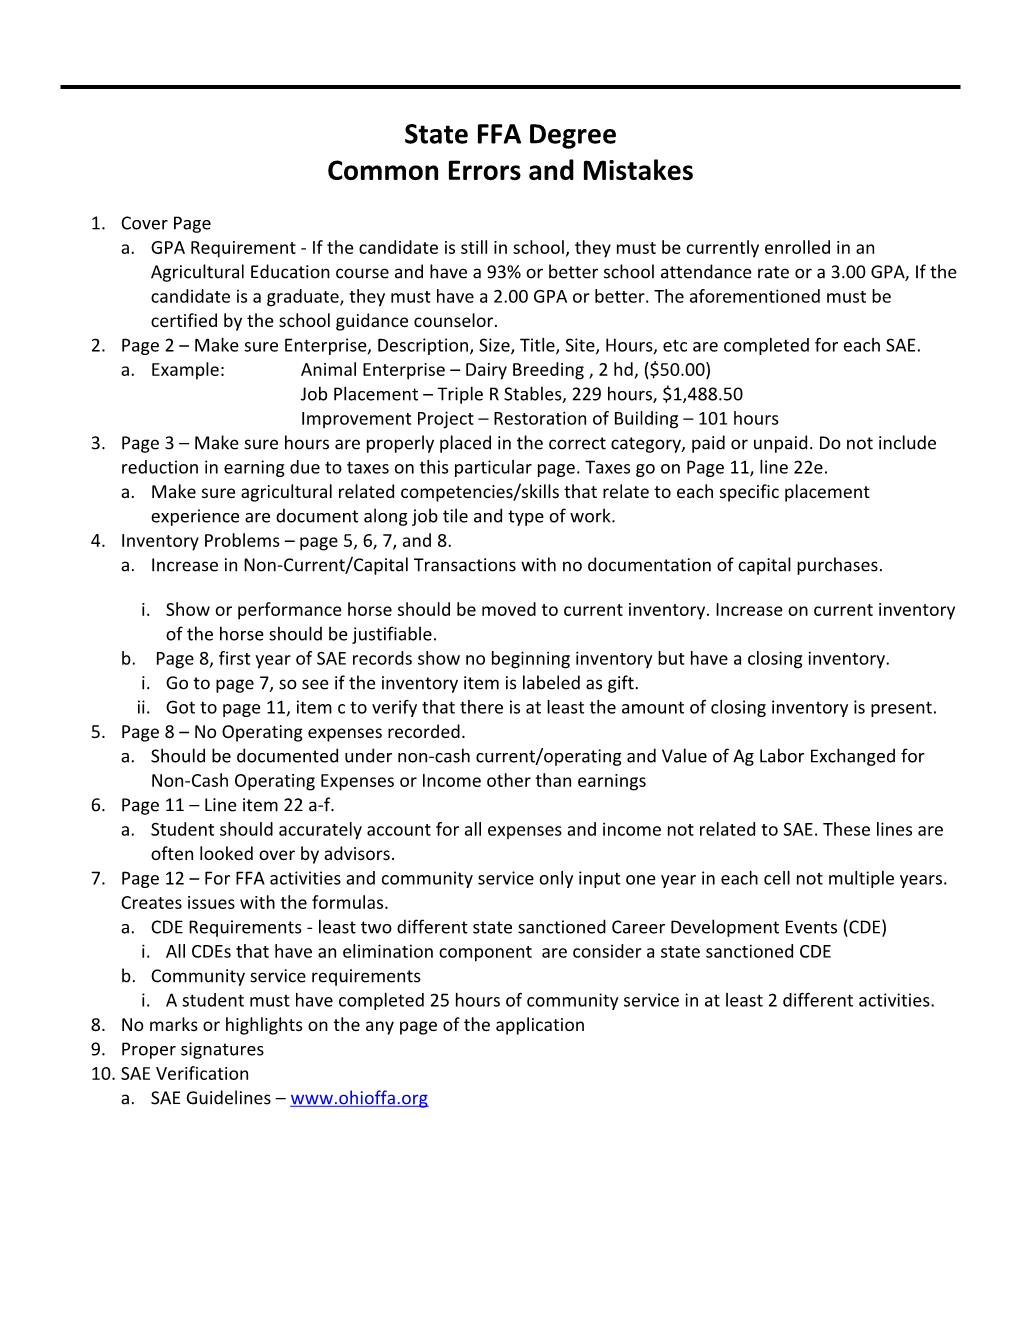 Common Errors and Mistakes